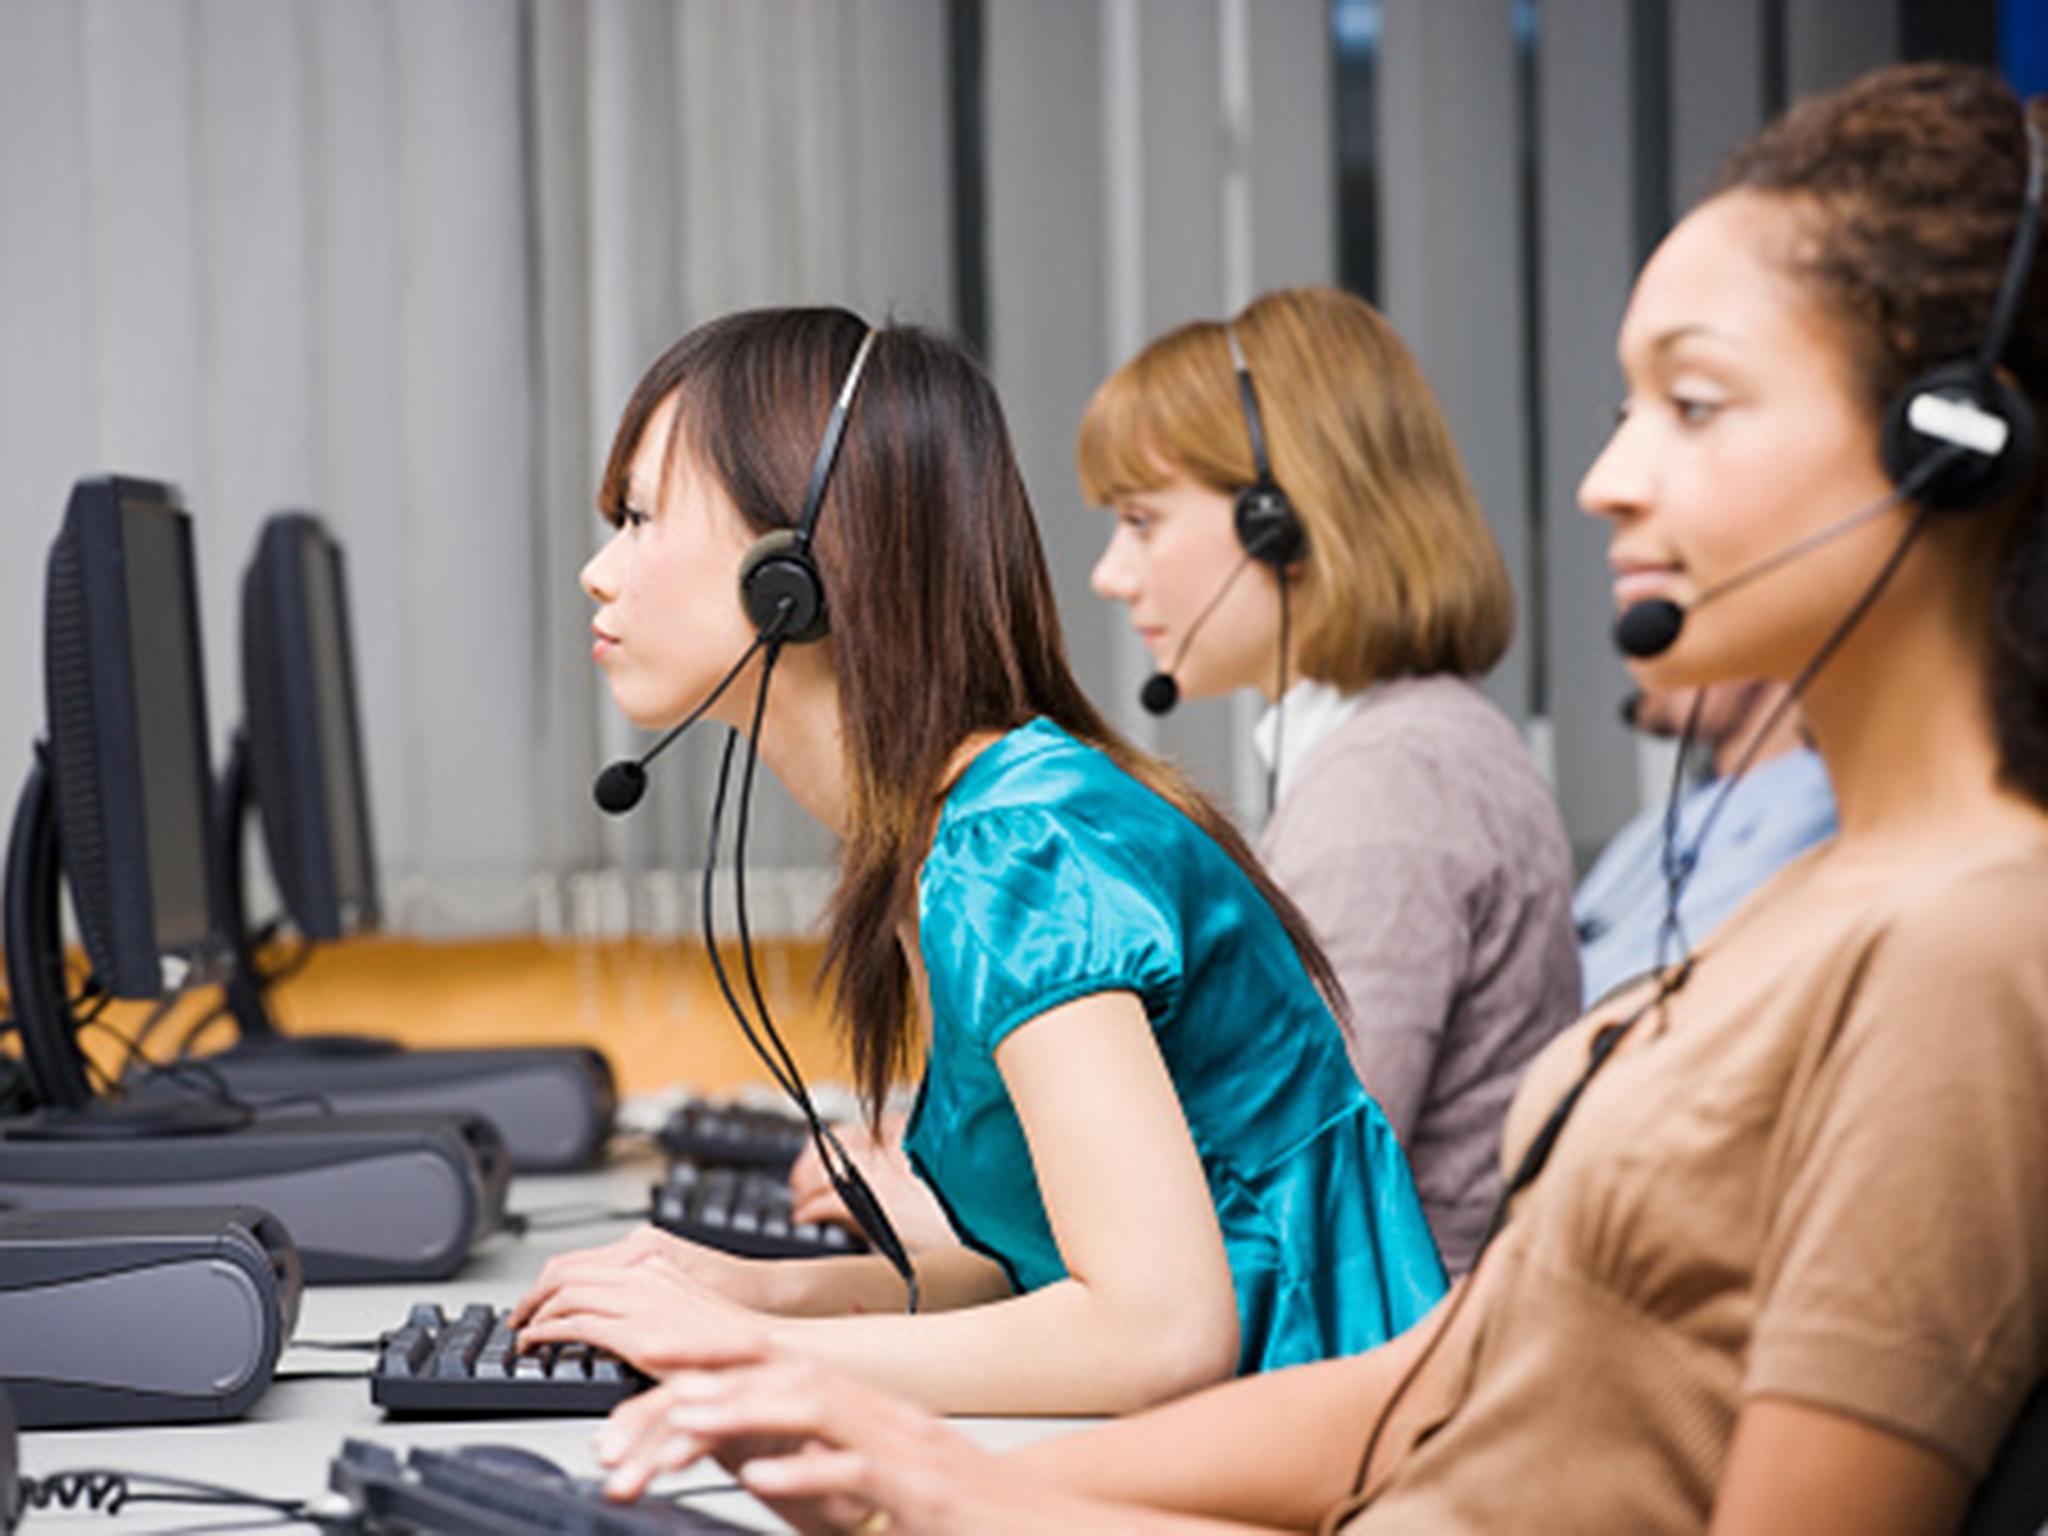 The over-recruitment of women to call centres could be detrimental to gender equality